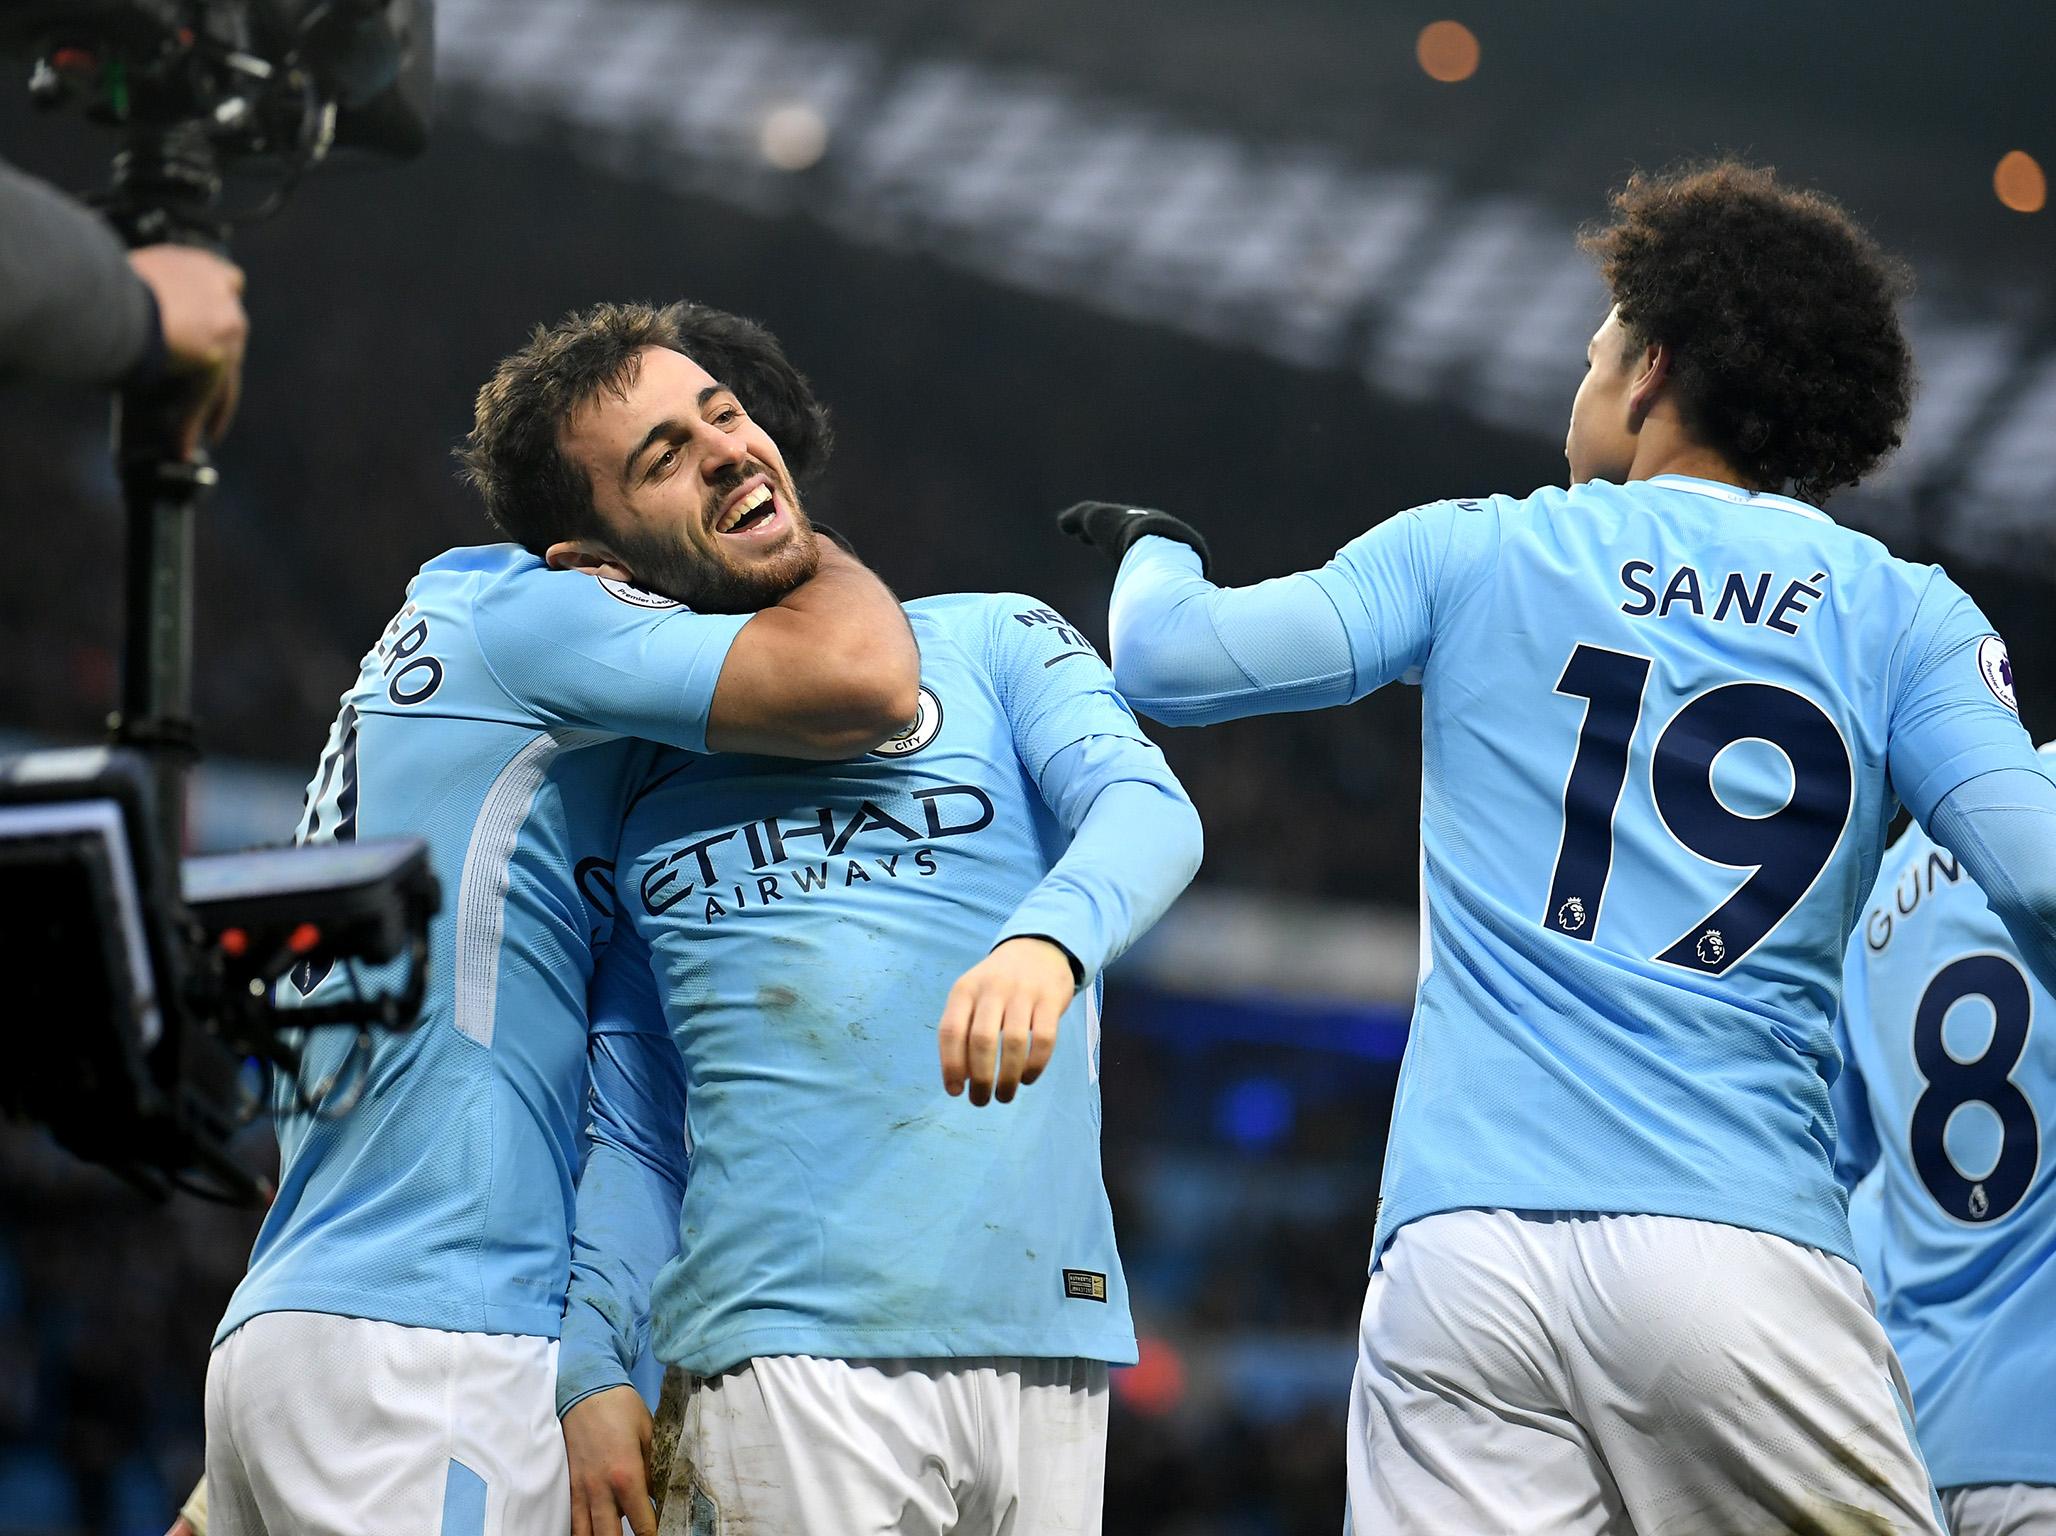 Manchester City were too good for Chelsea